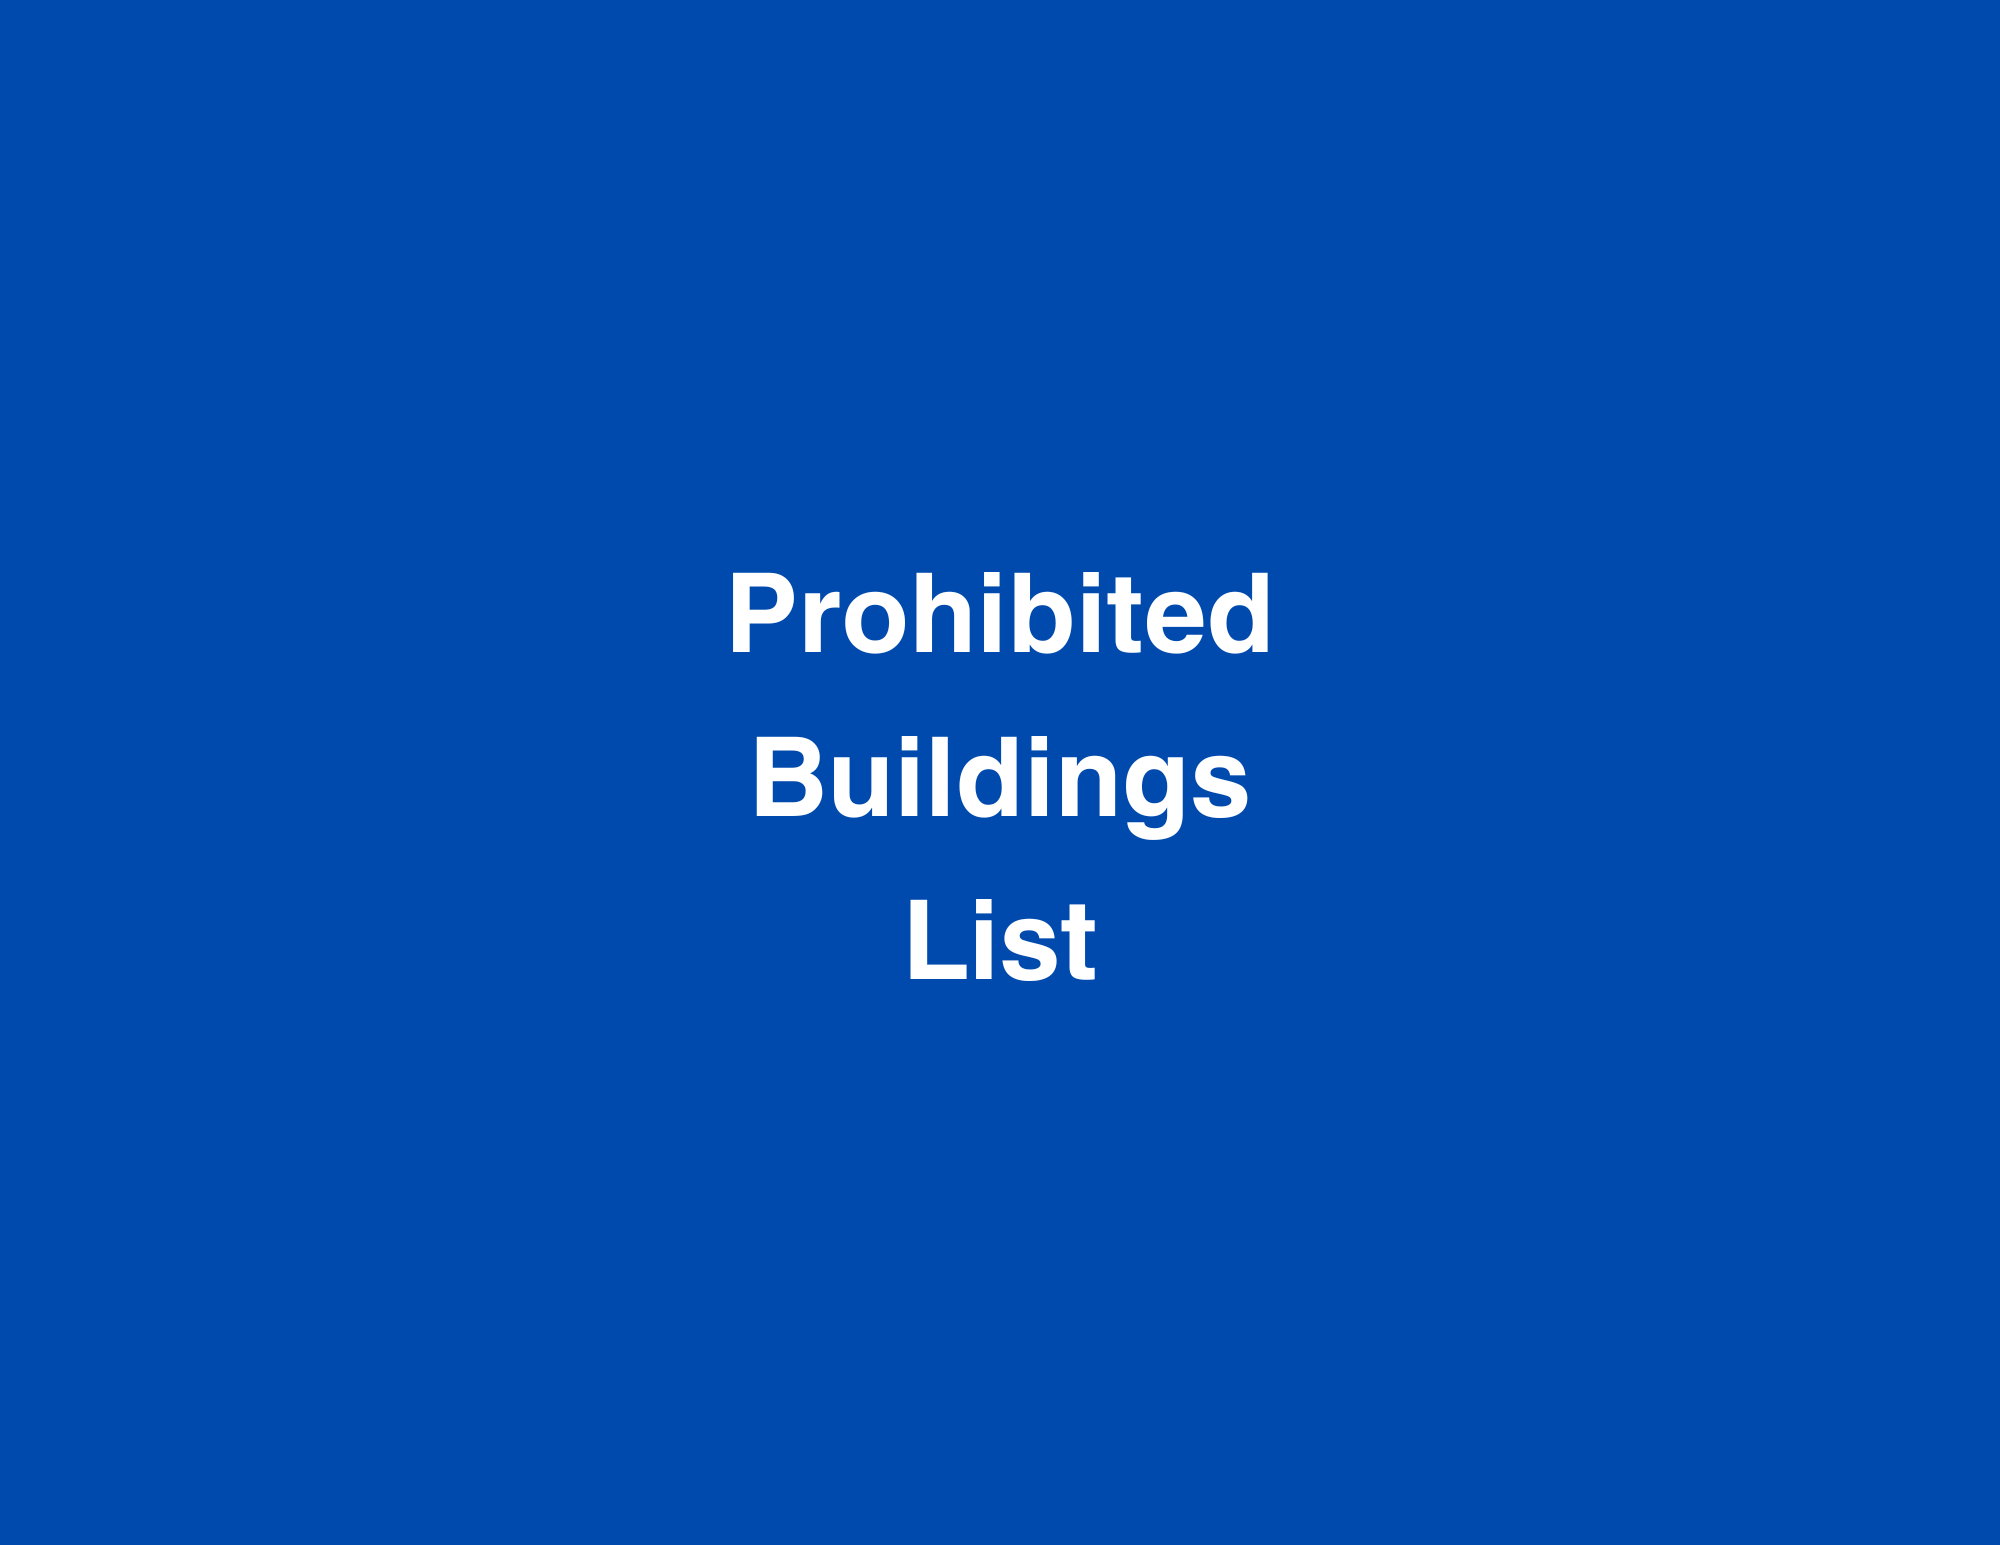 The Prohibited Buildings List